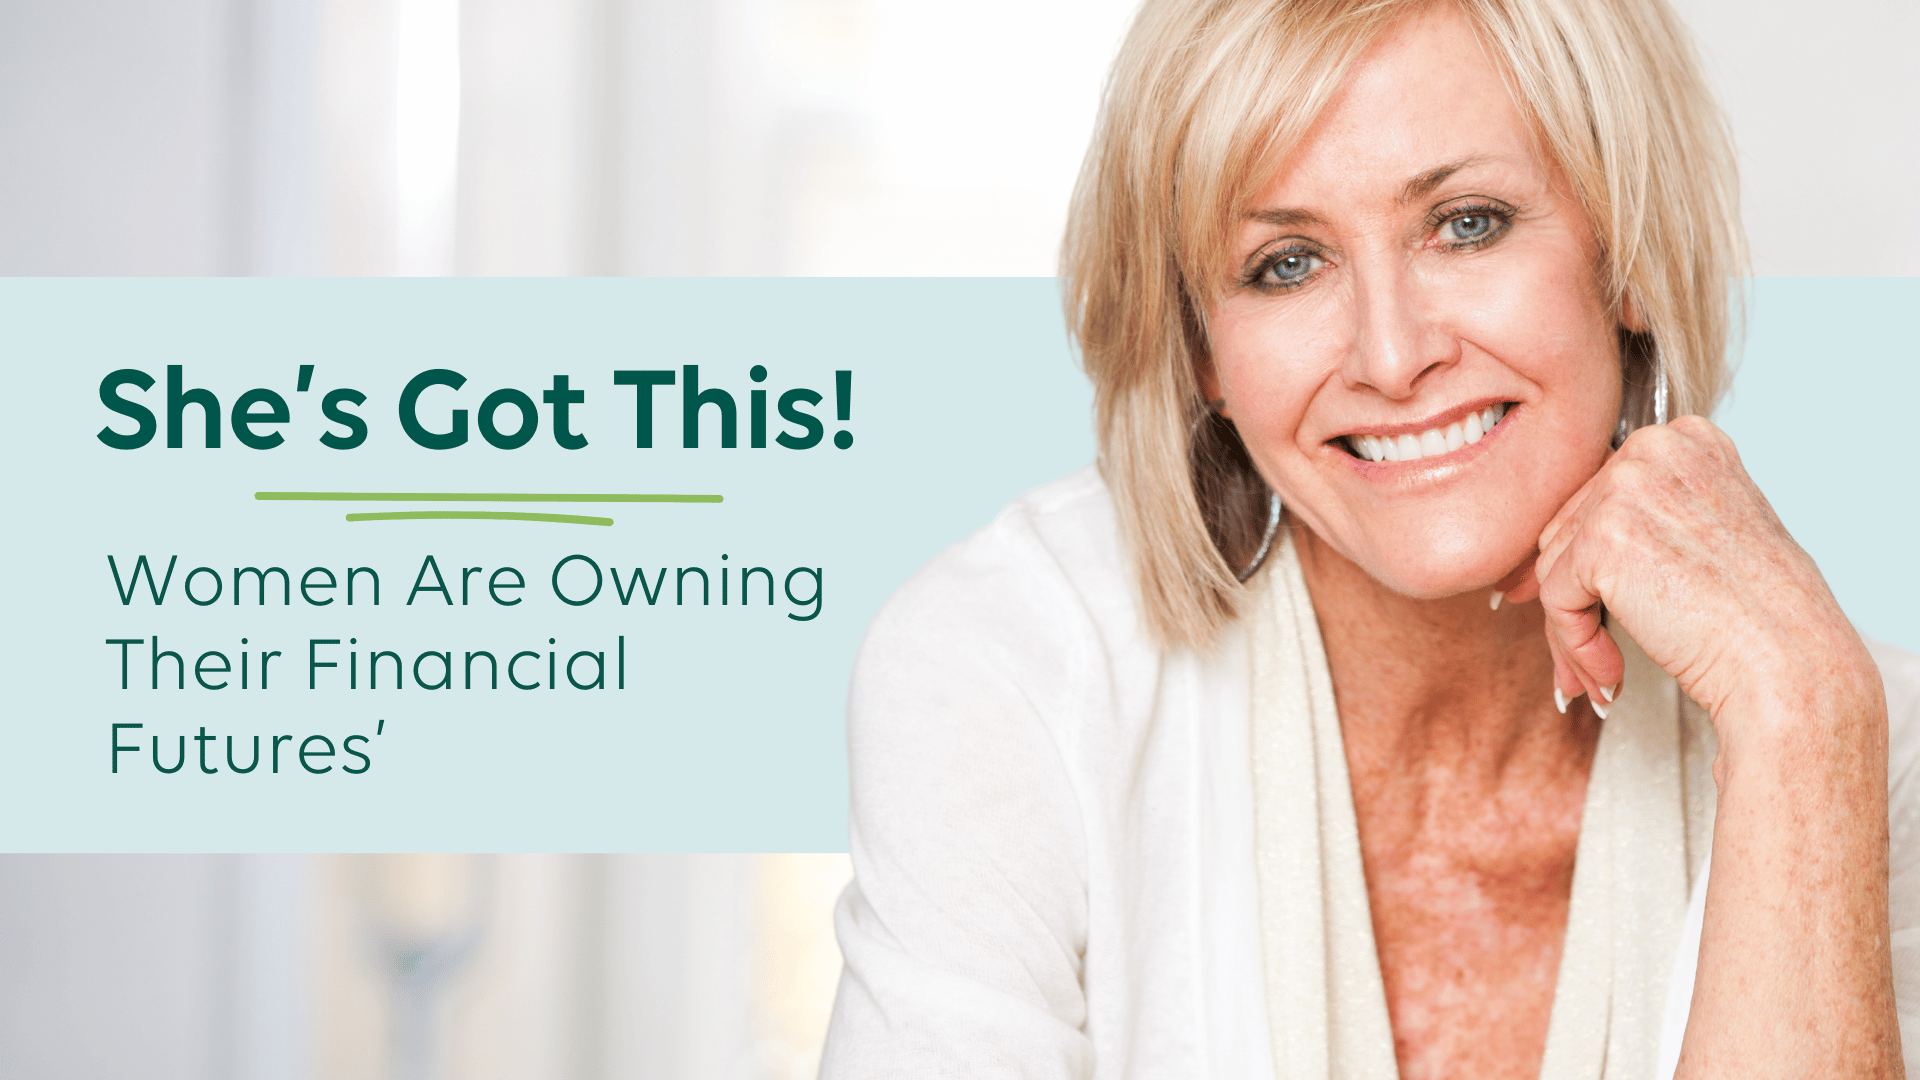 She's Got This! Women Are Owning Their Financial Futures'